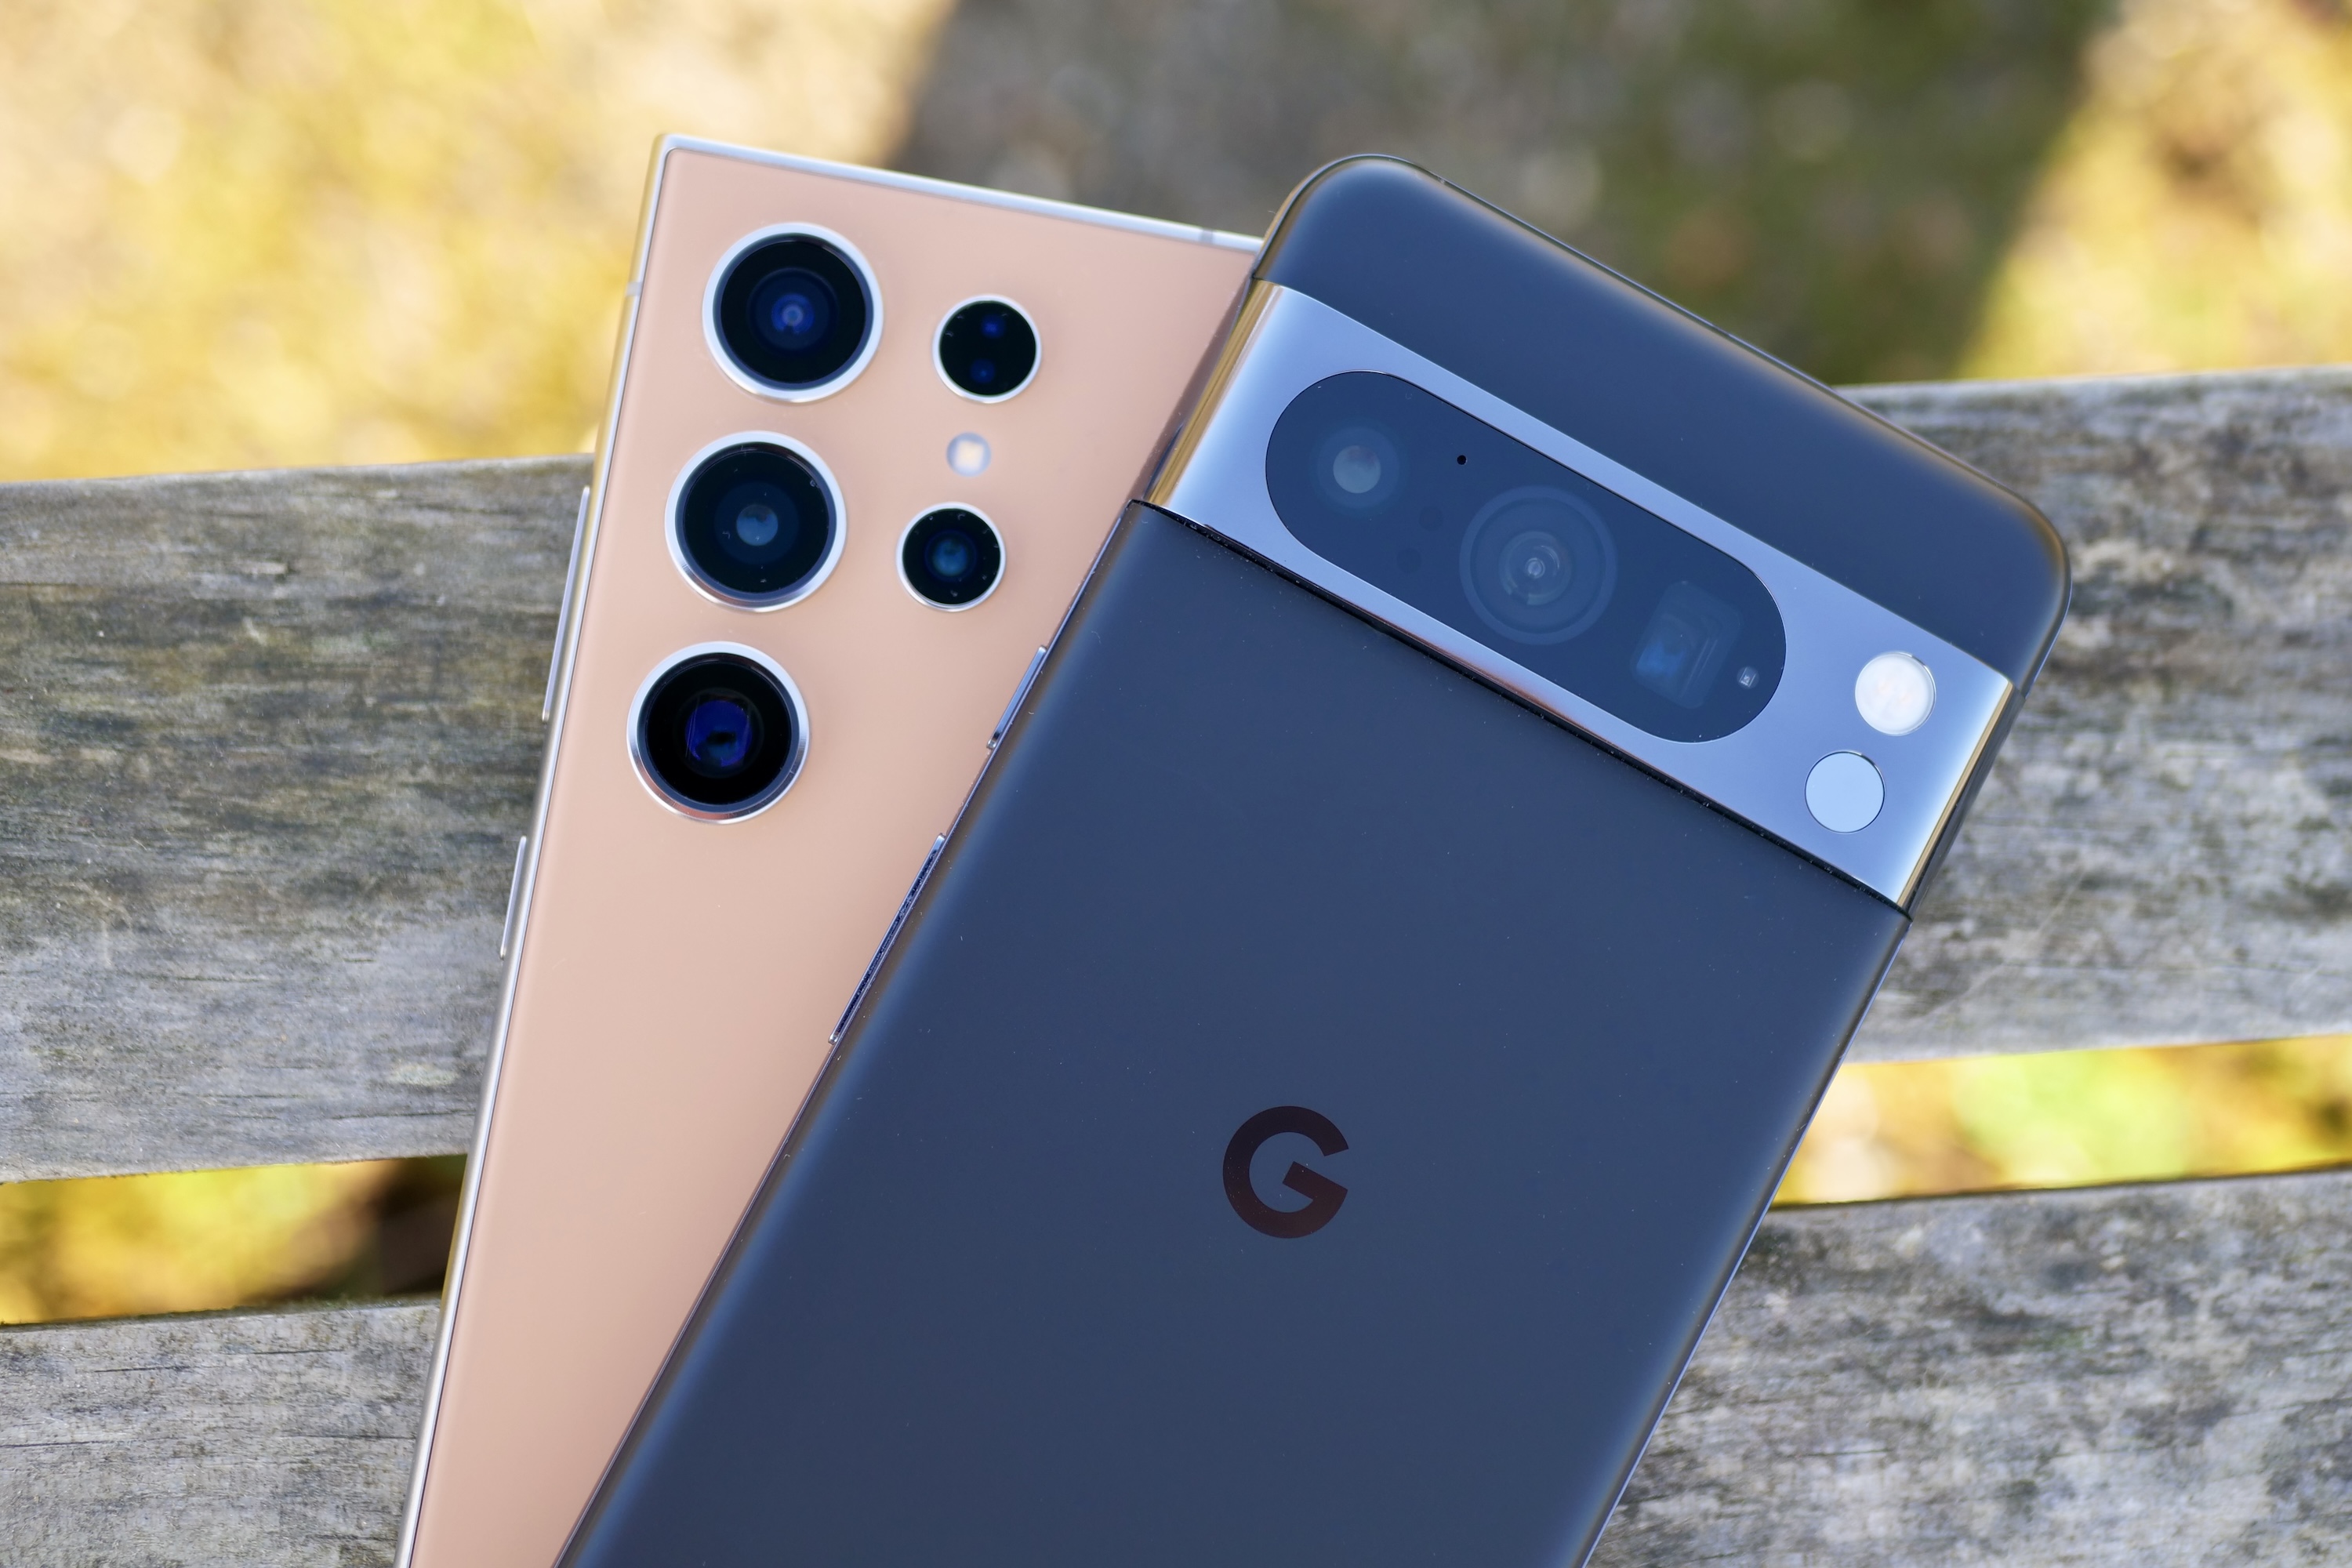 Google's best Pixel phones zoom past Samsung on this one camera